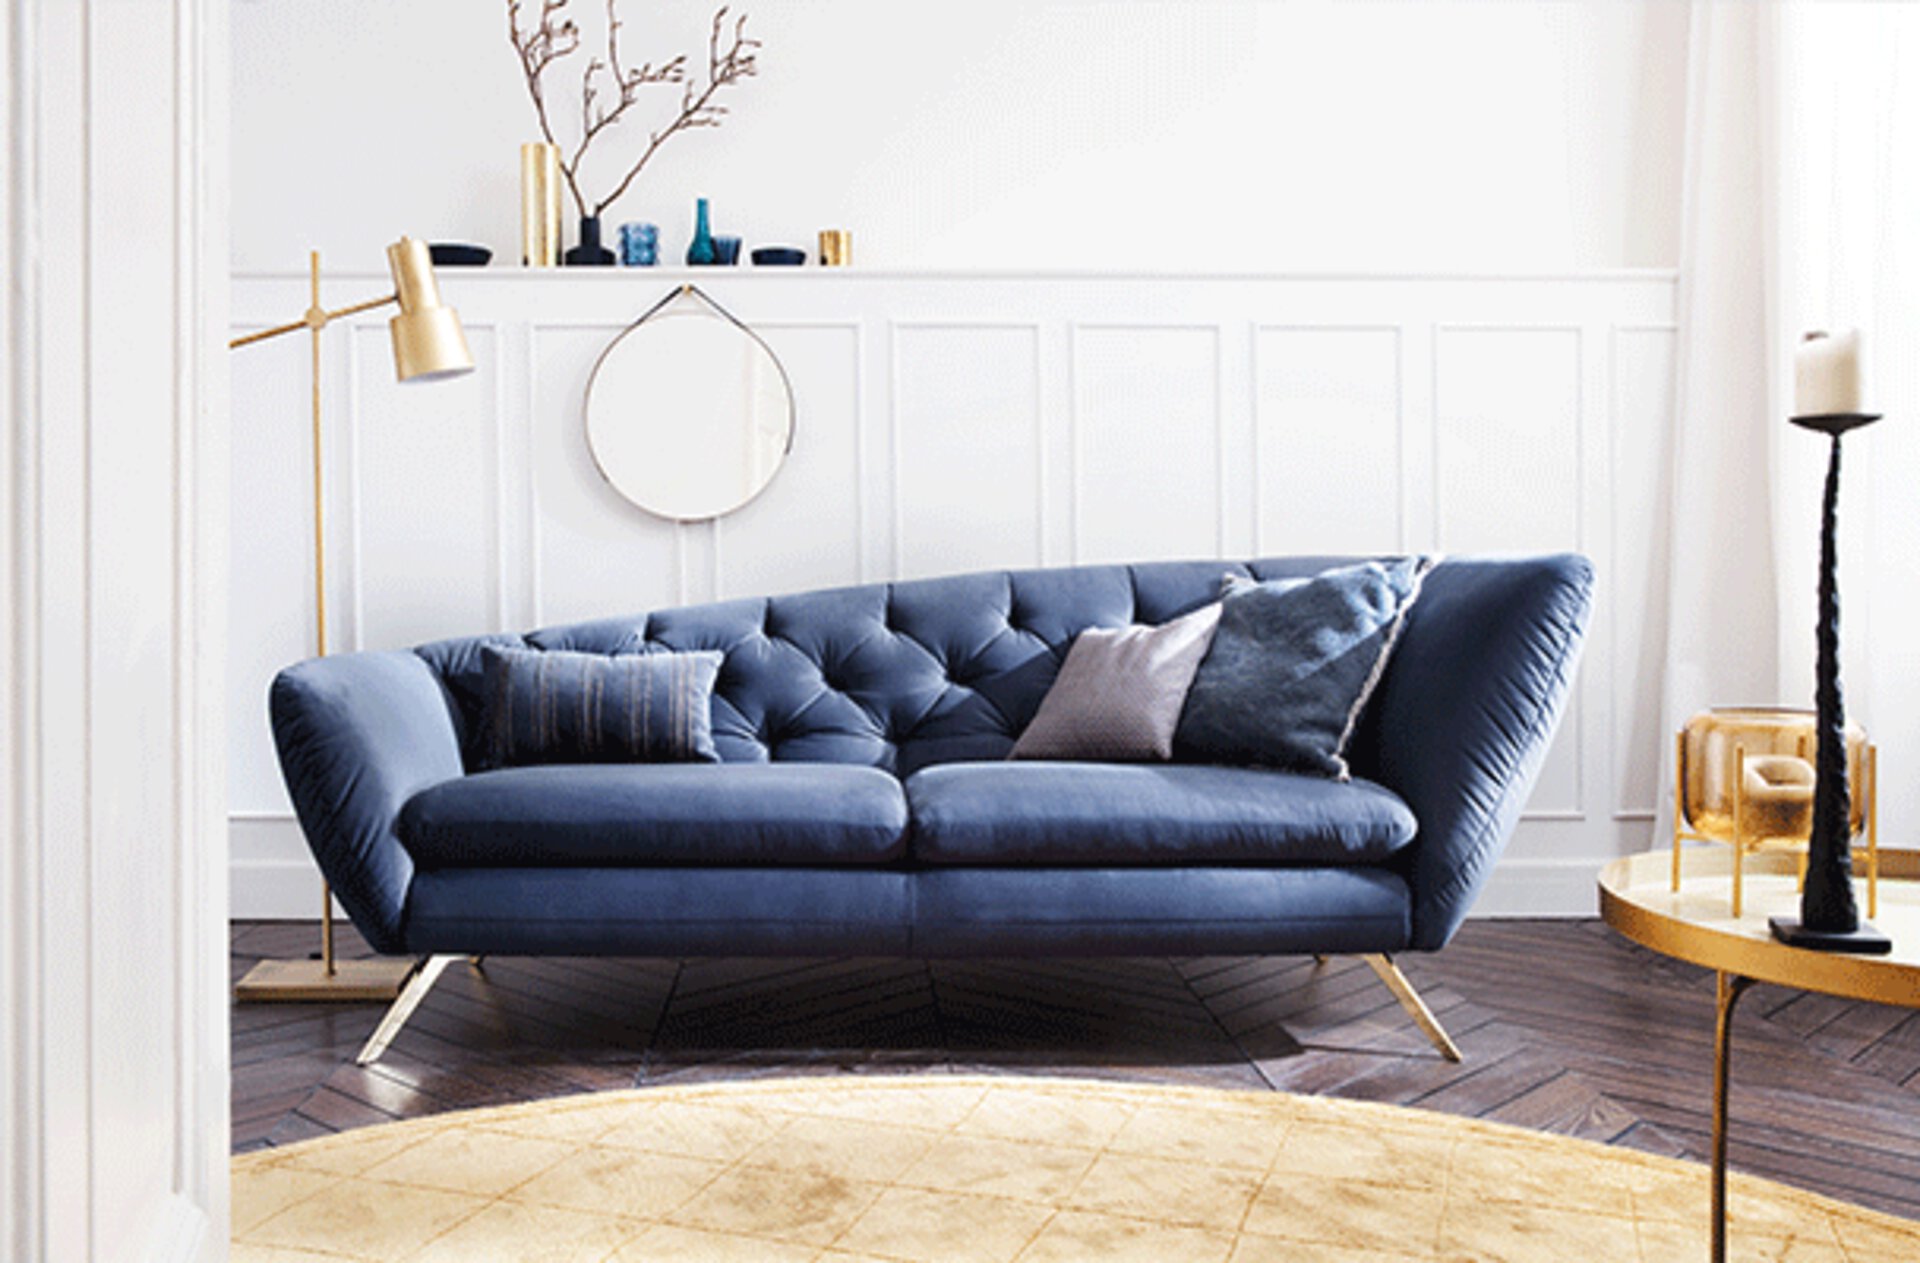 Polstersofa in Canape-Form in dunklerem Blau.